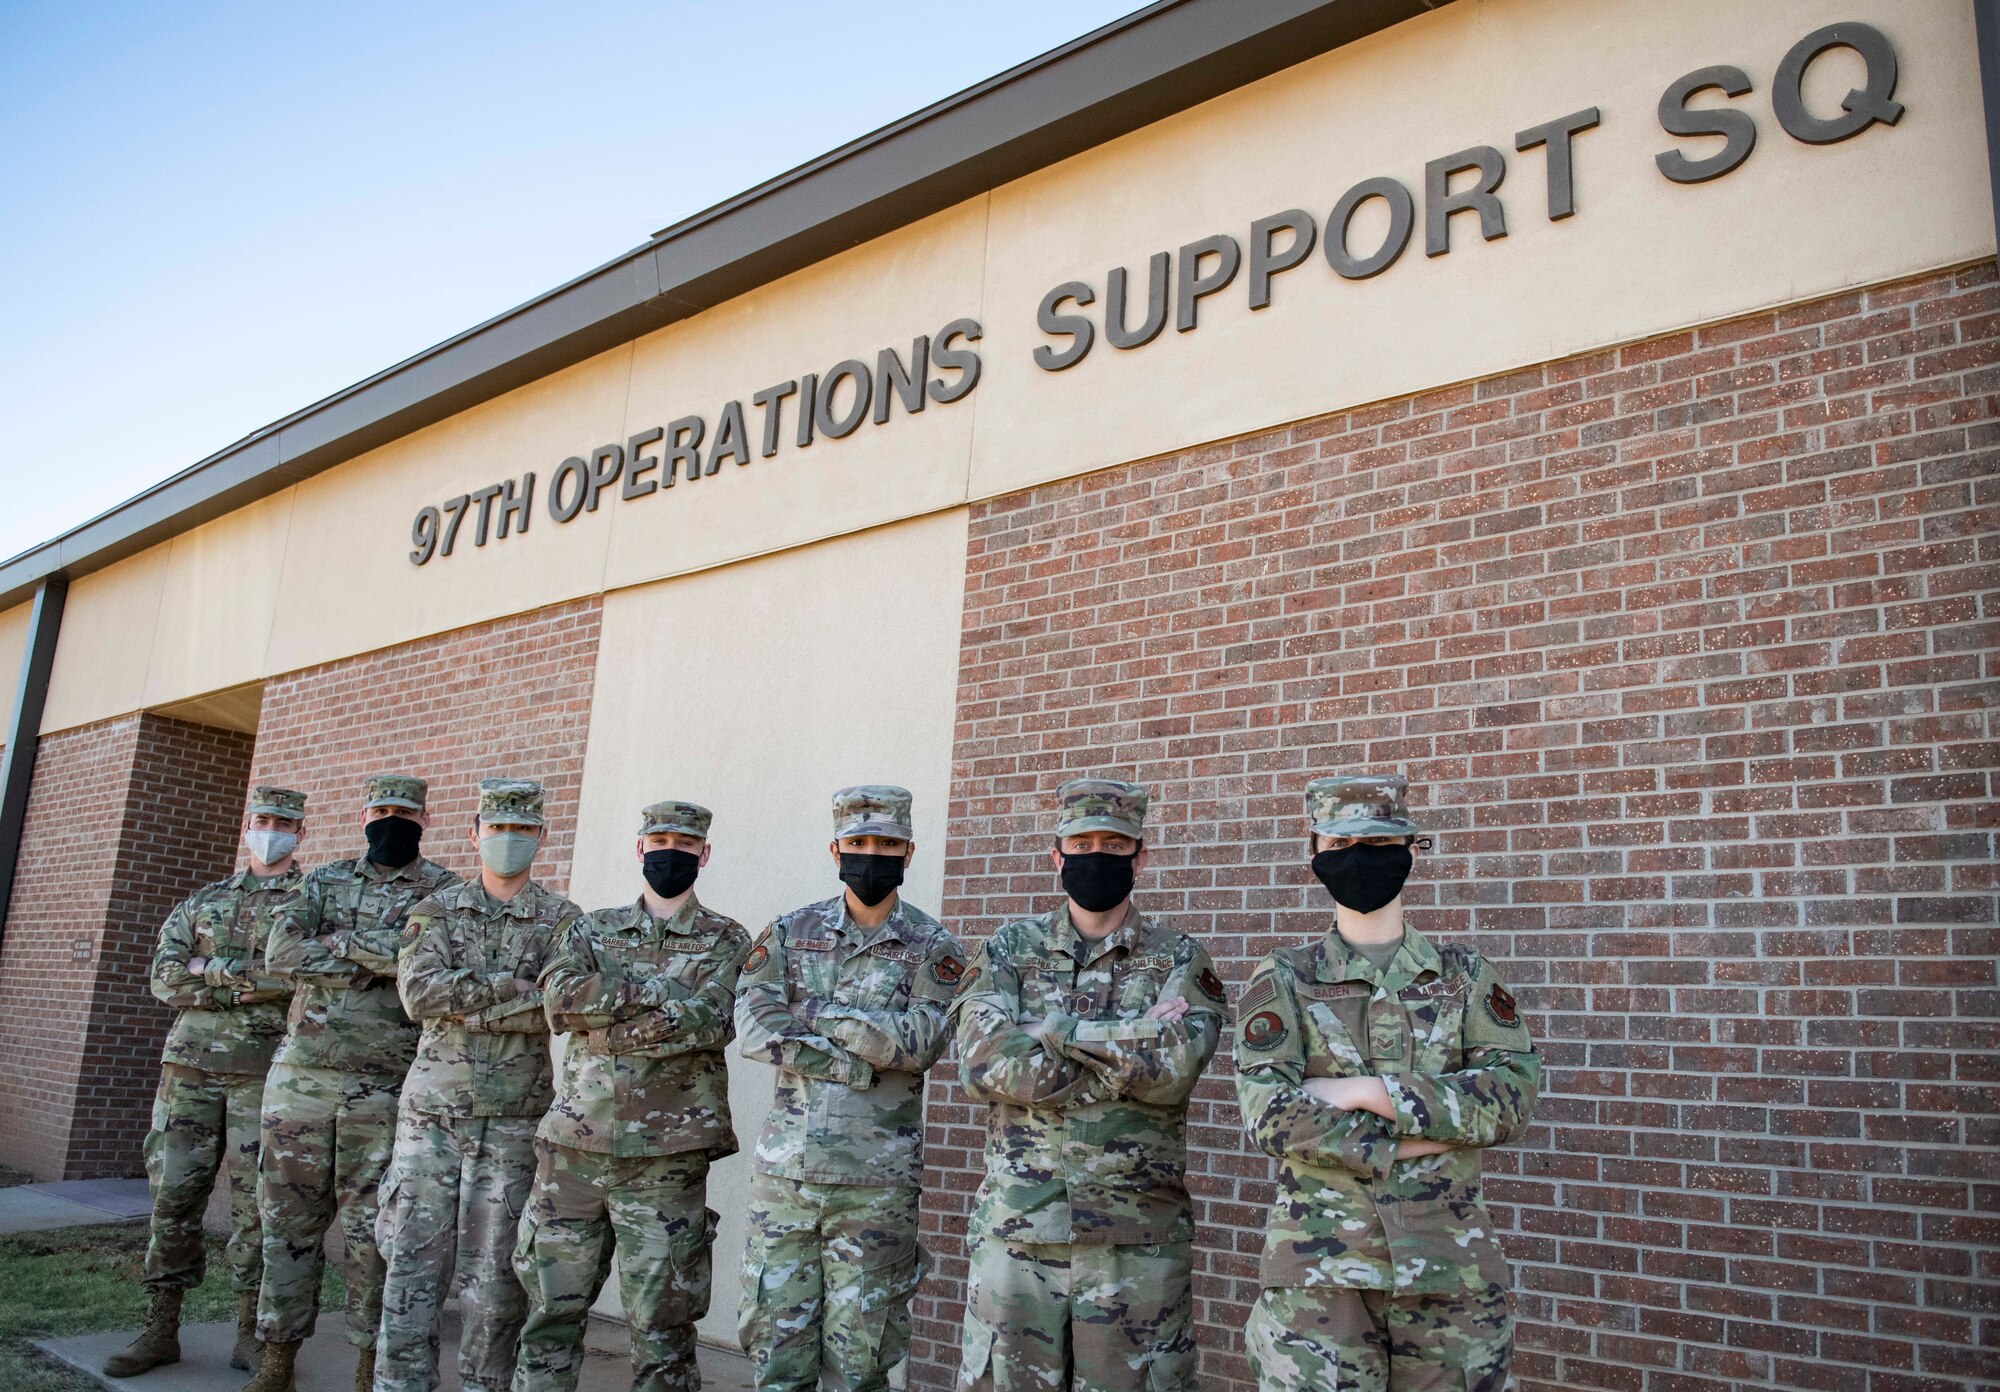 97th Operations Support Squadron Intelligence and Tactics Flight.